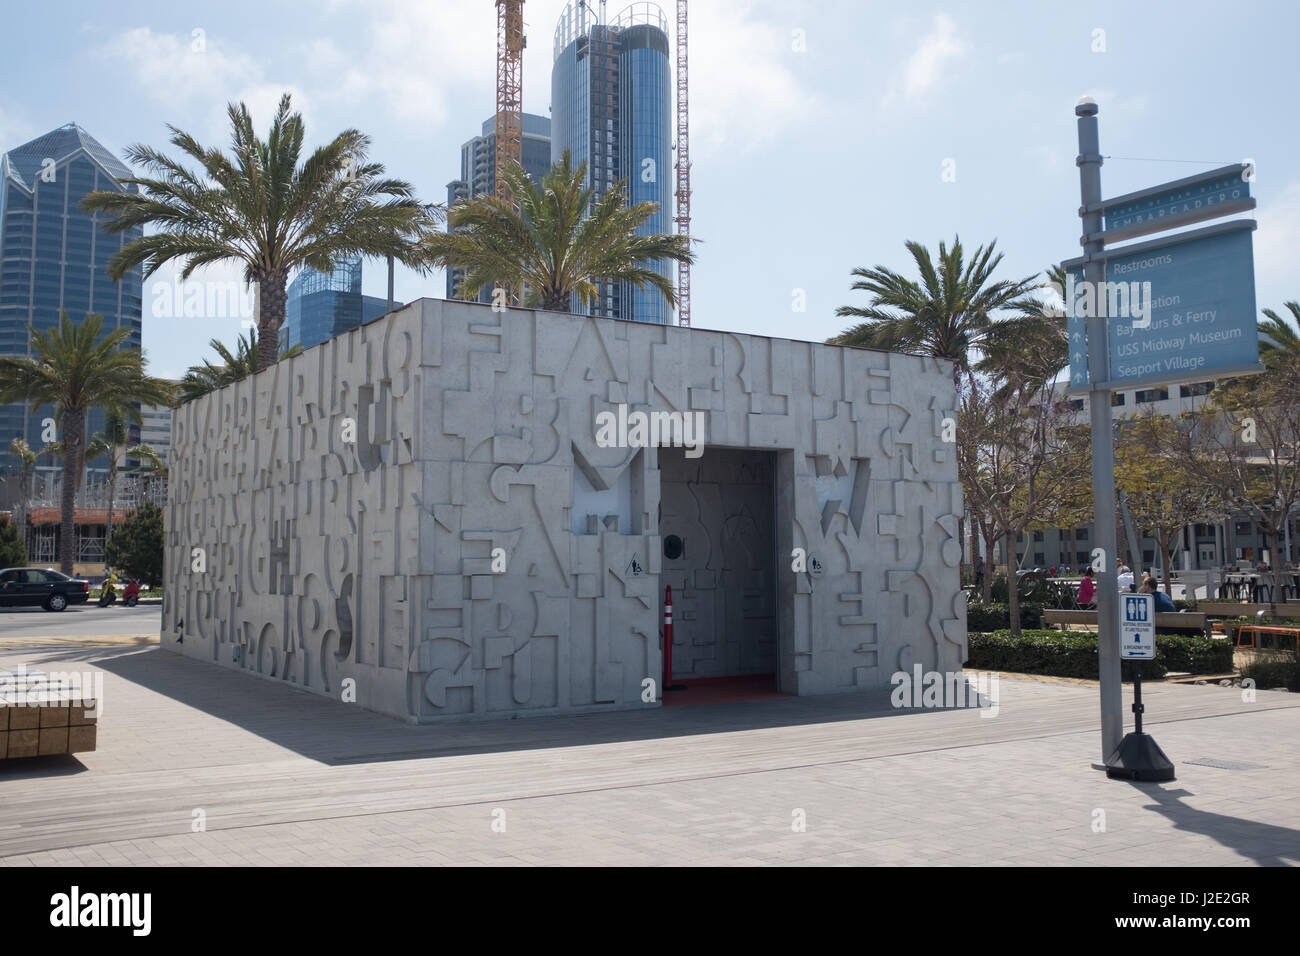 Public restrooms on the San Diego waterfront Stock Photo